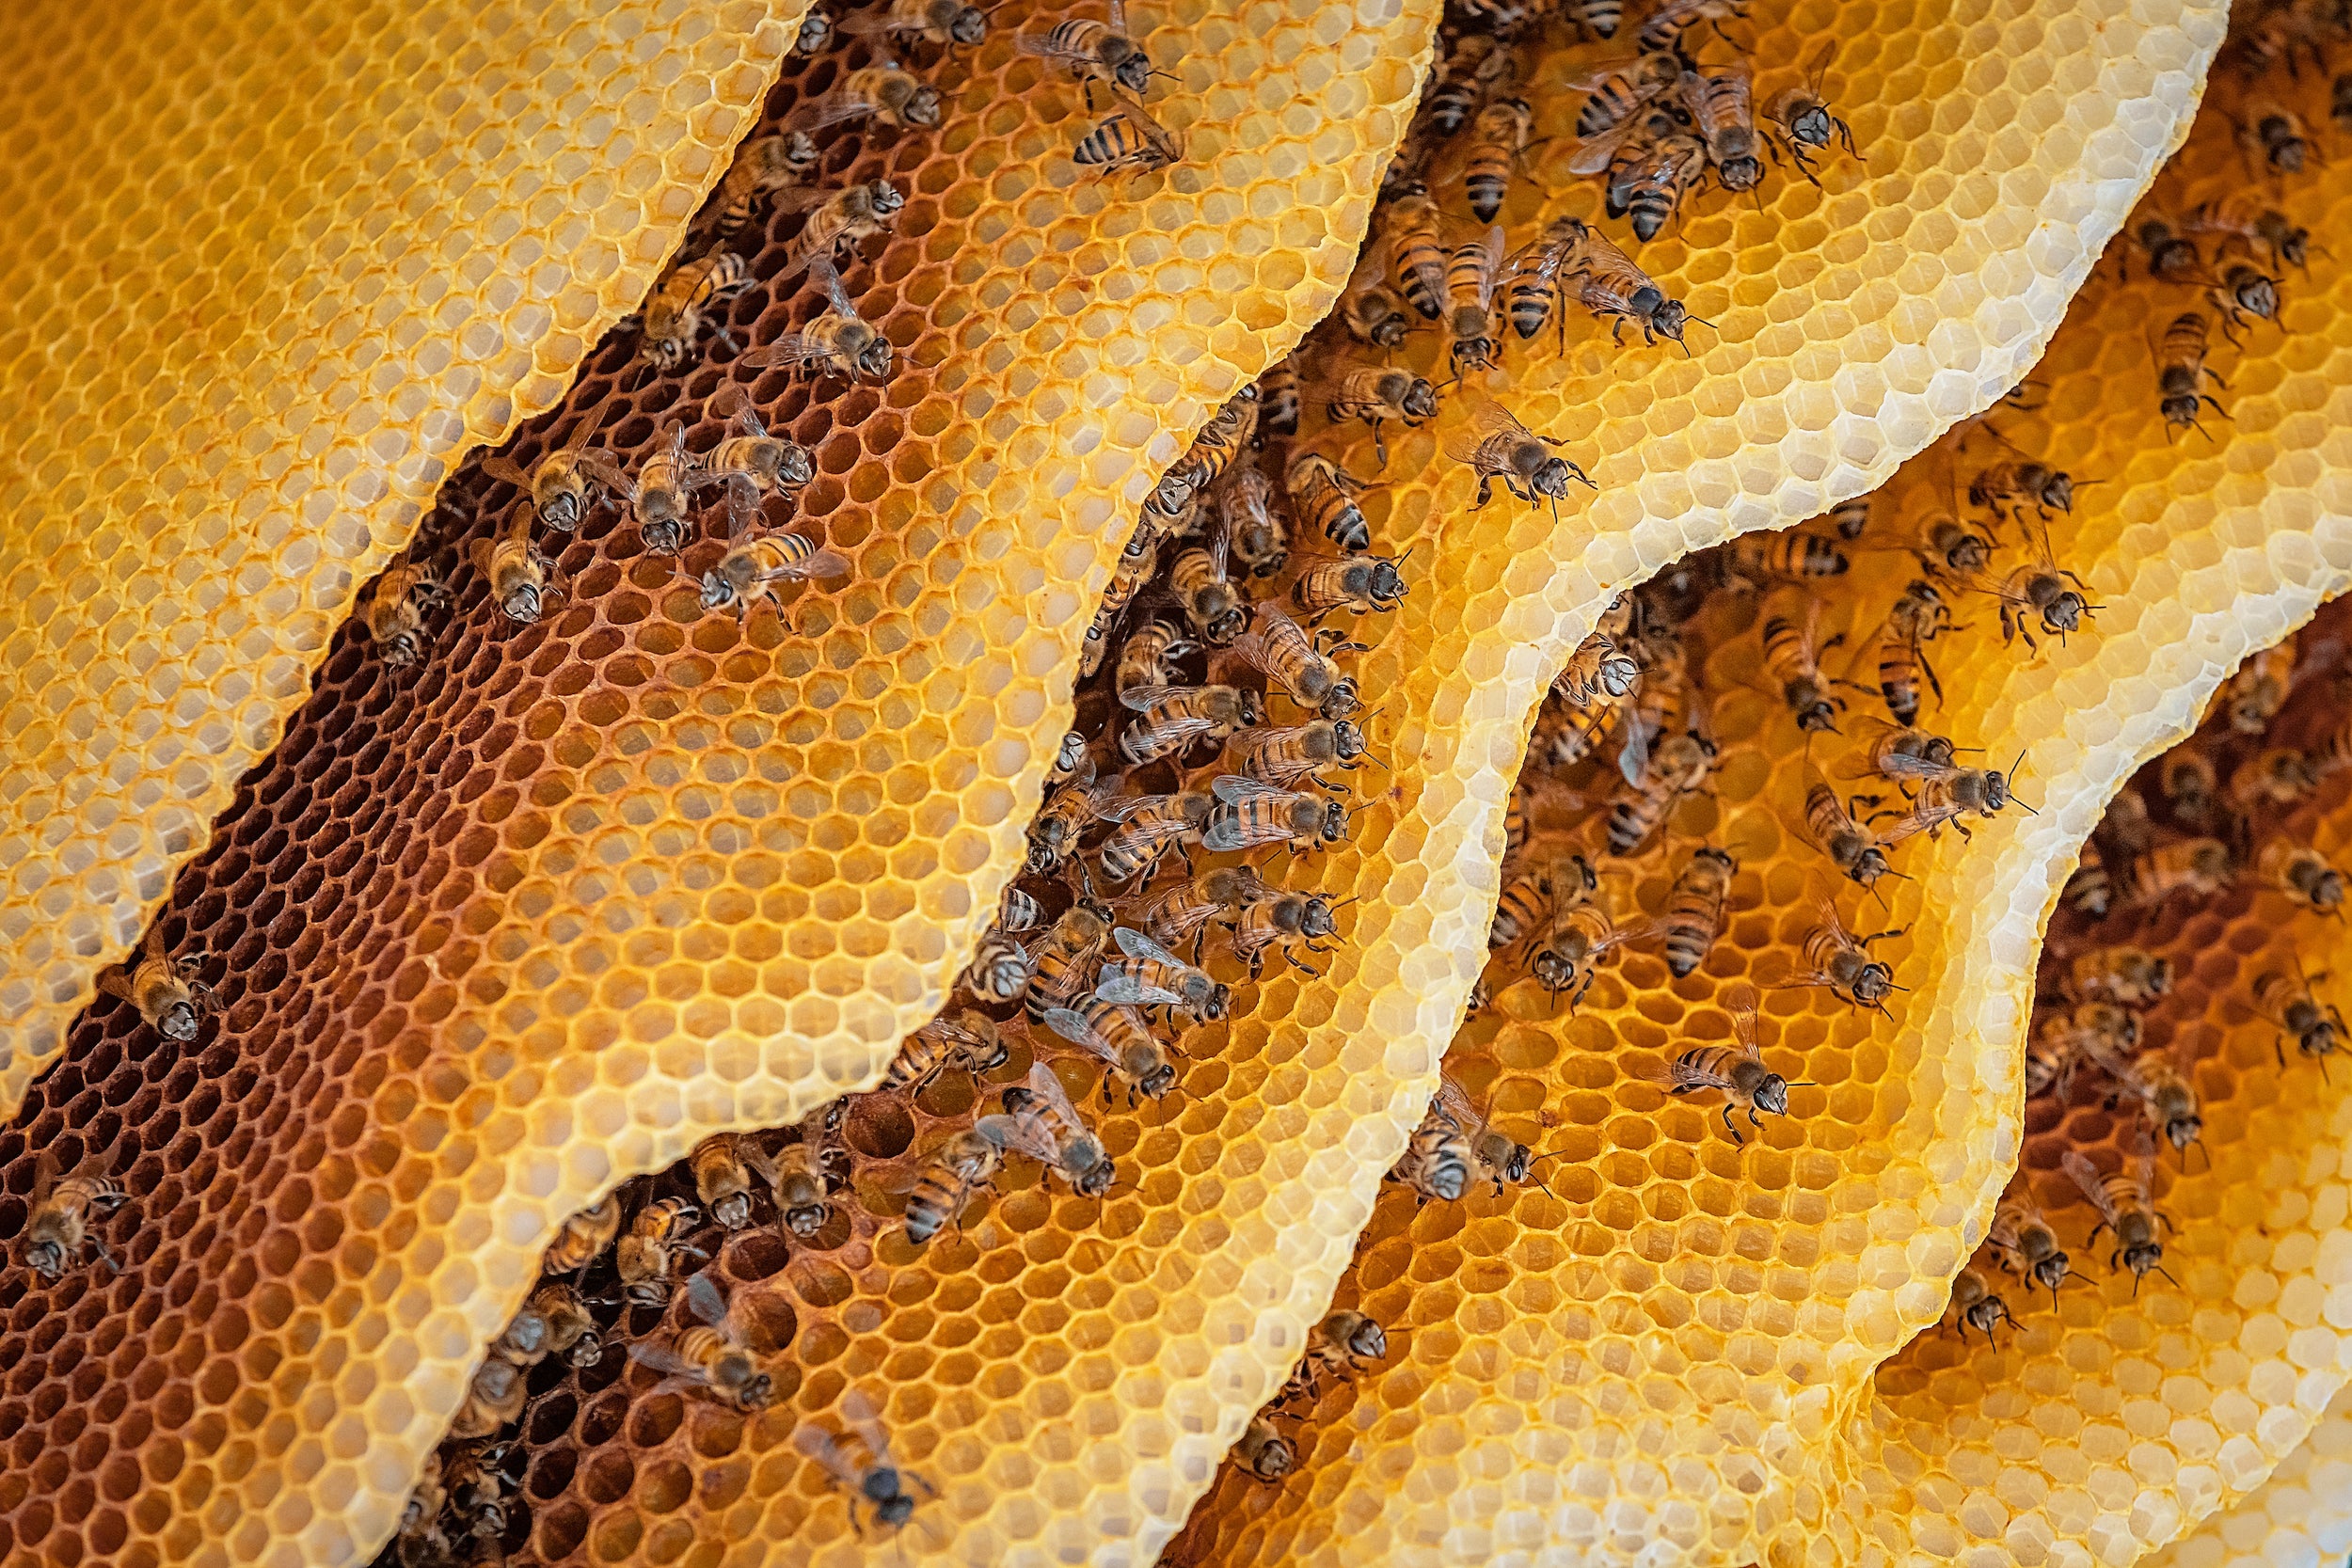 The Problem with Honey Bees - Scientific American